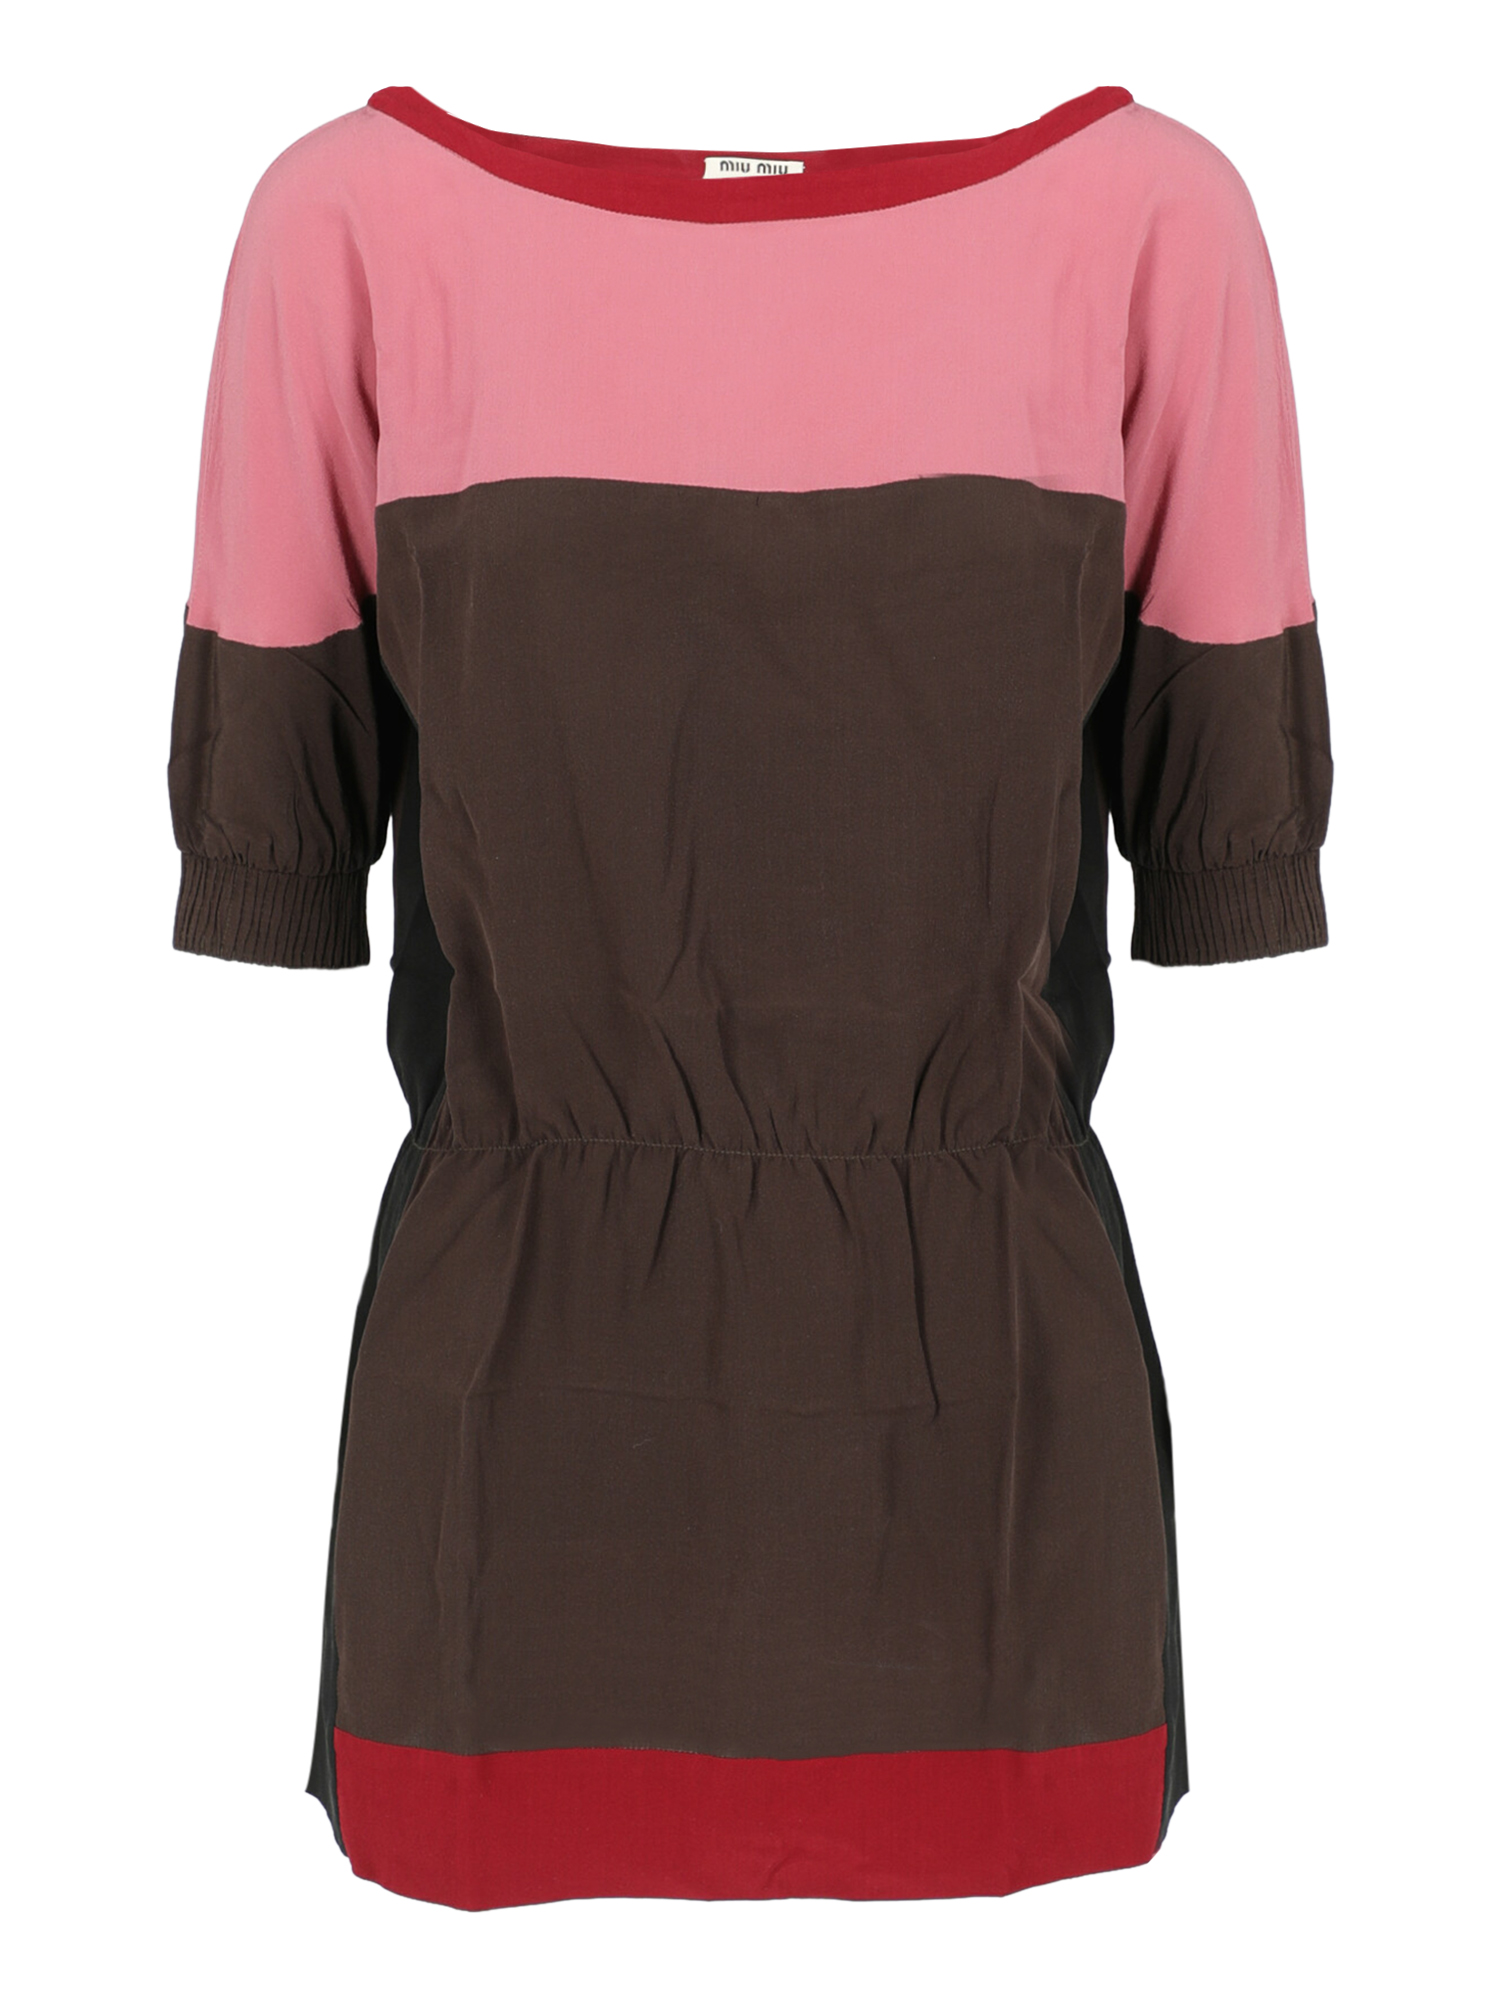 Gucci Femme T-shirts et tops Brown, Pink, Red Fabric